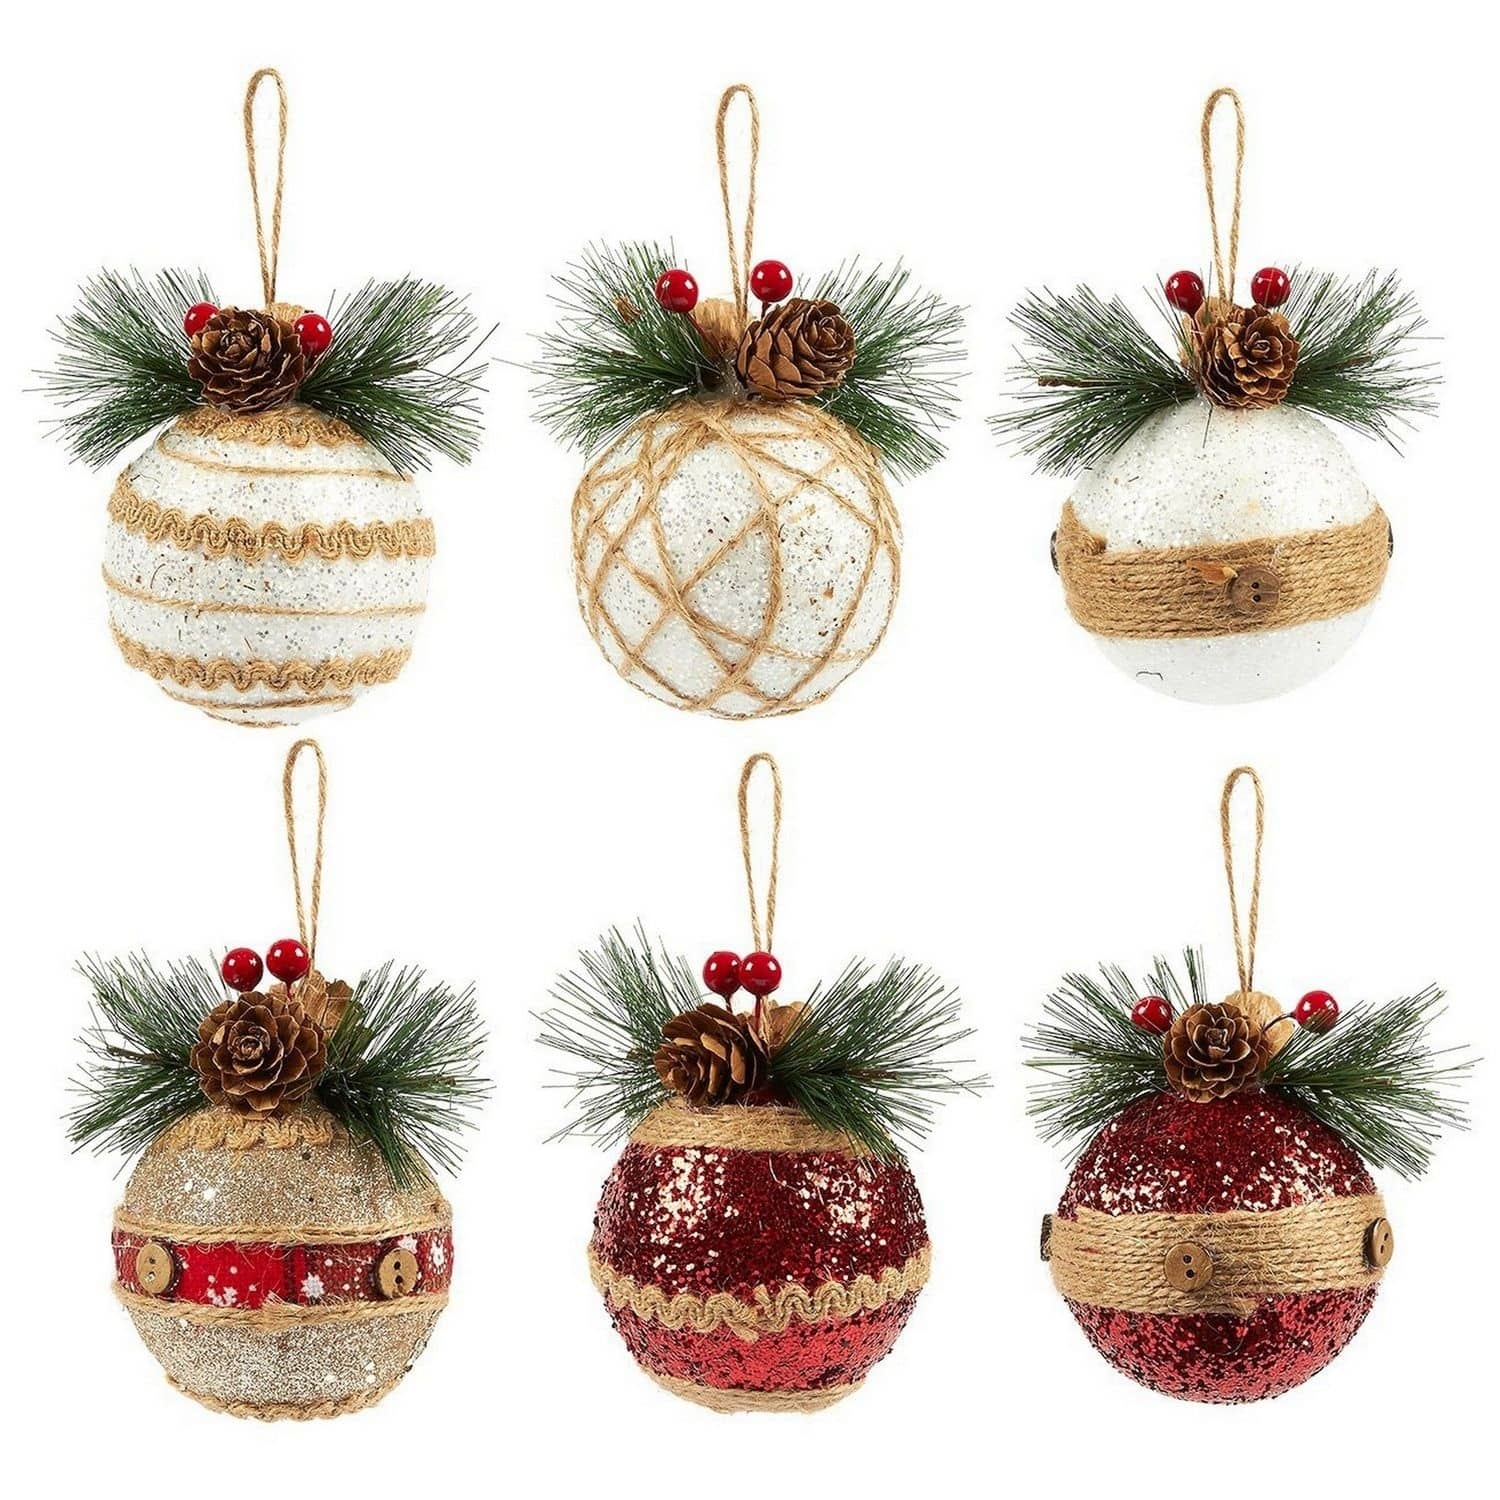 6-Pack of Small Christmas Tree Decorations Beautiful Rustic Ornaments 2 ...